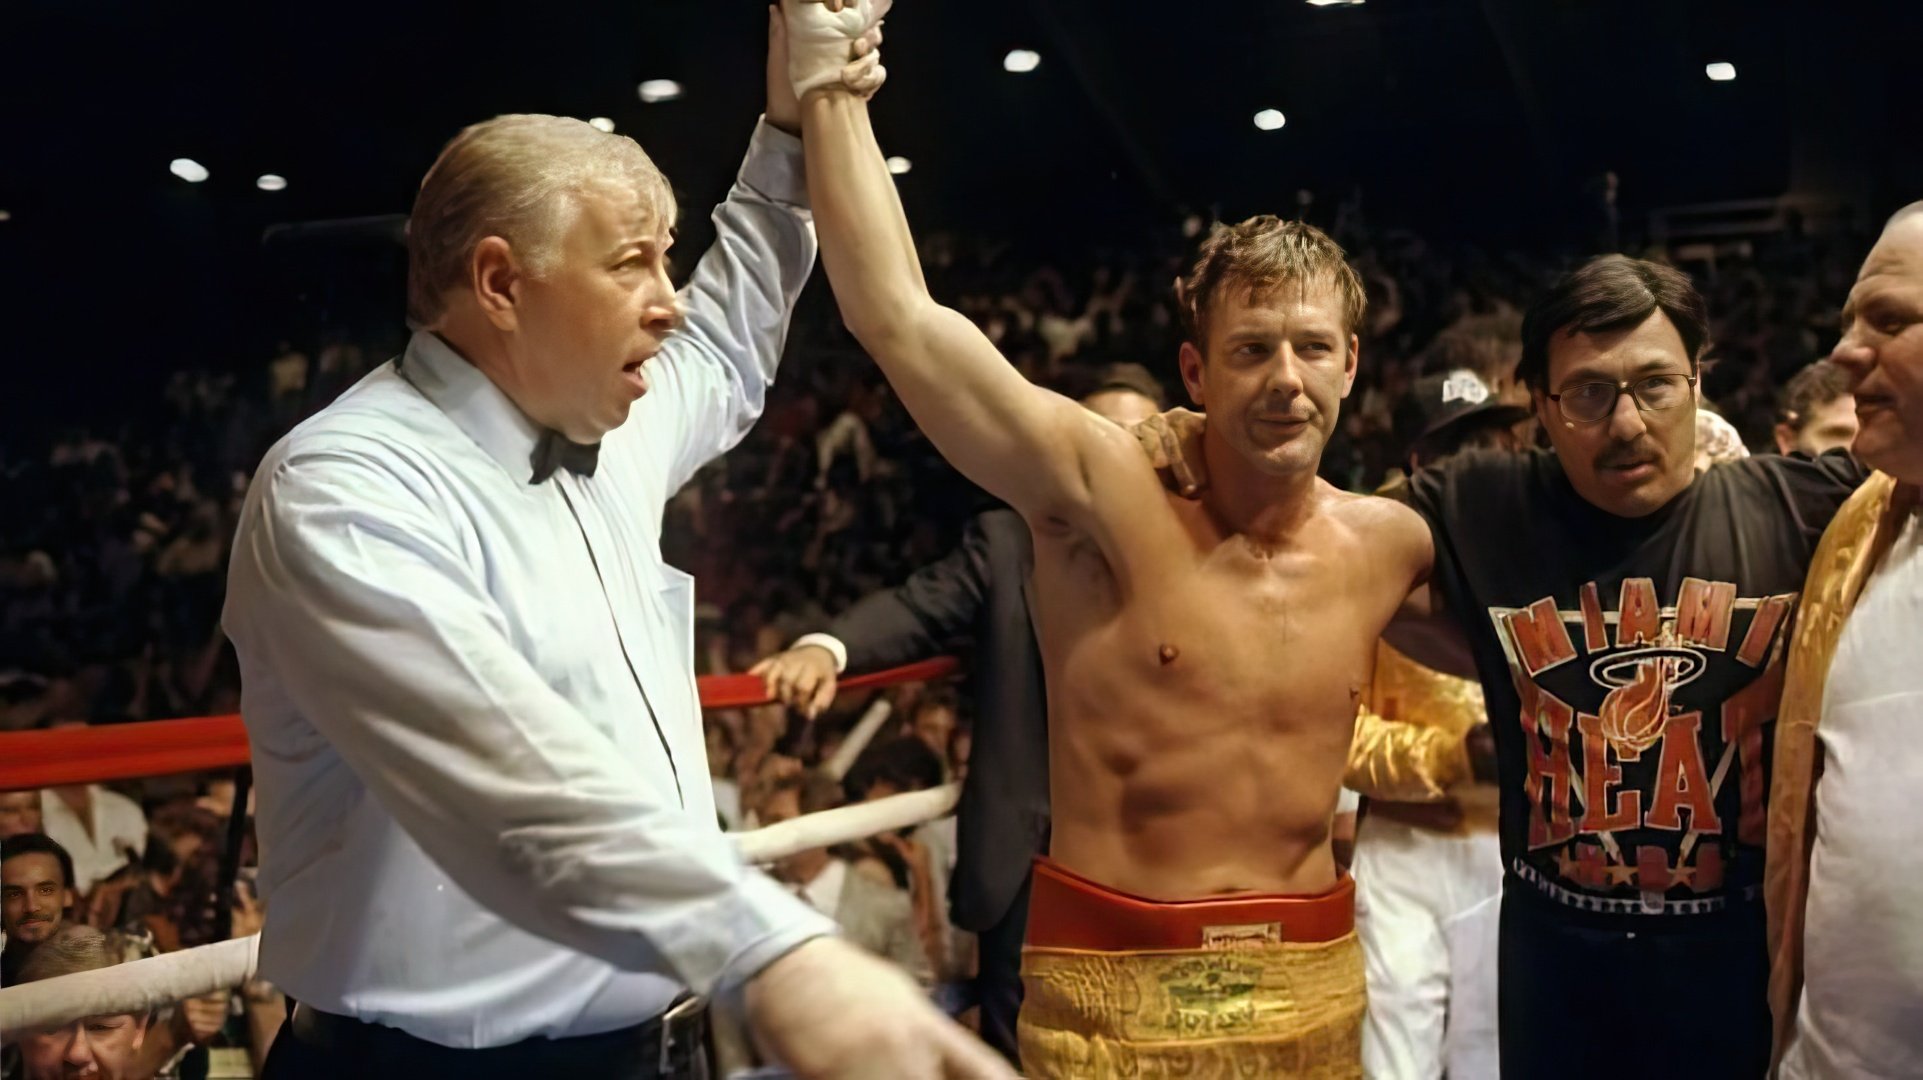 1994: Mickey Rourke Returns to the Ring